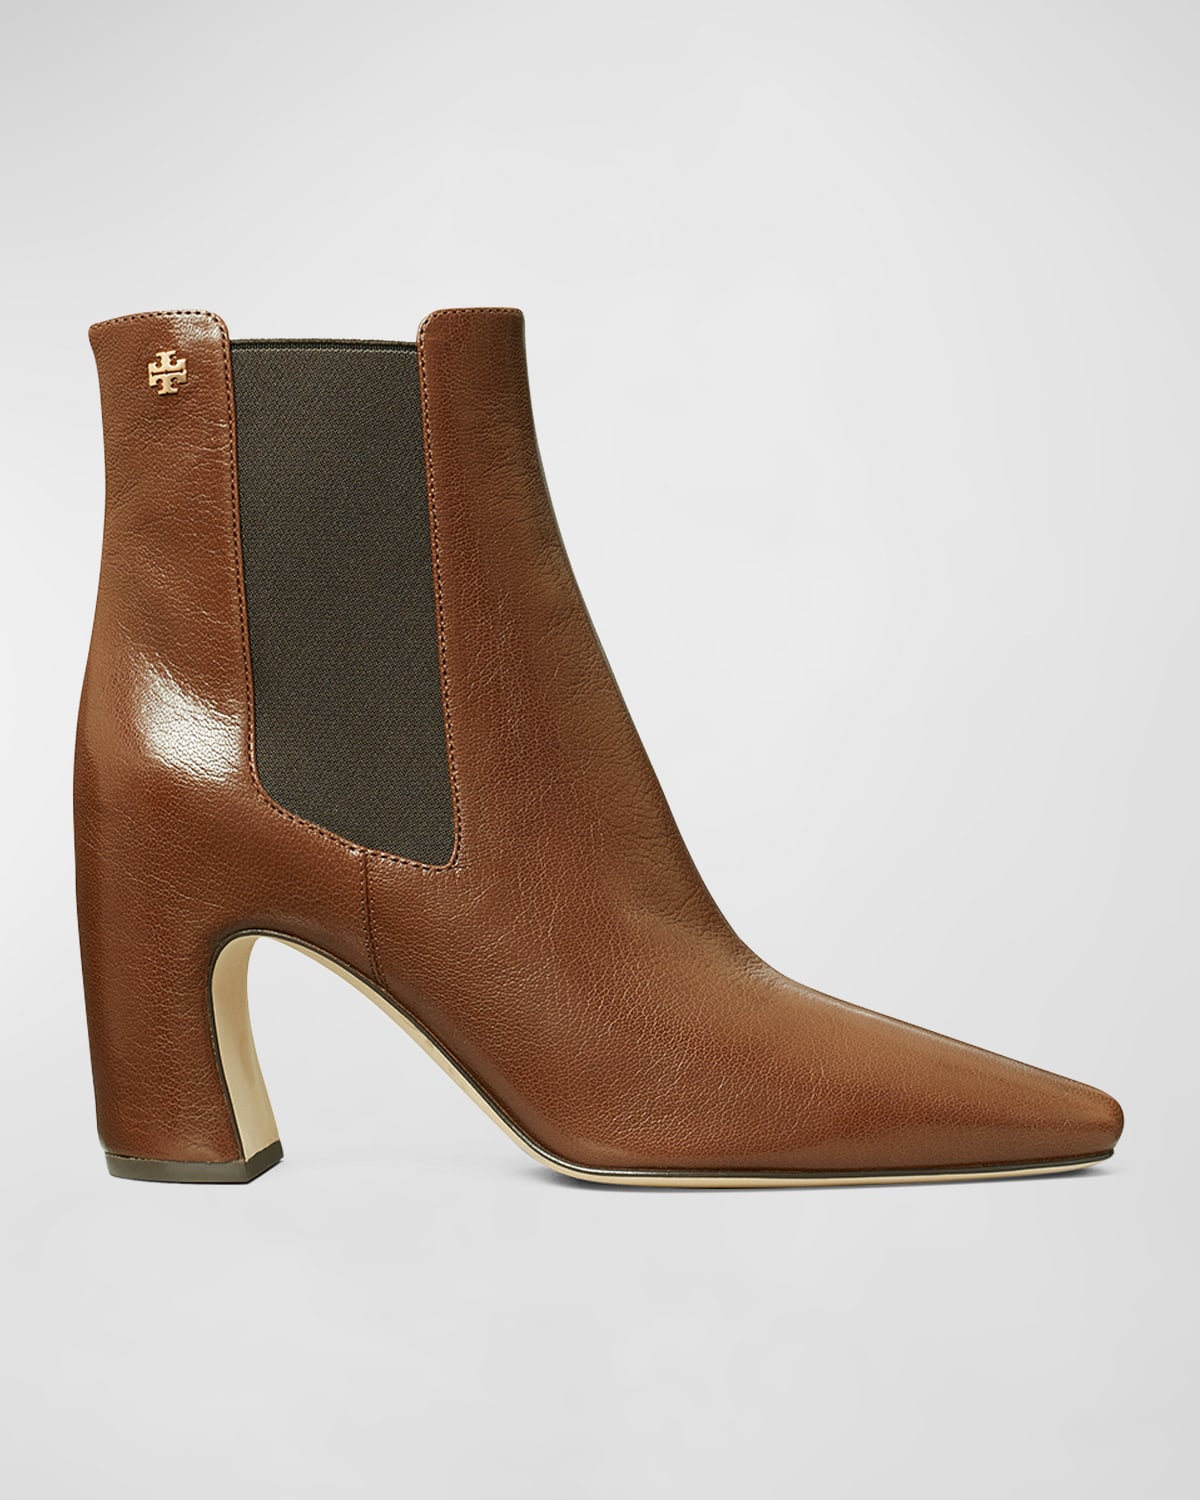 TORY BURCH BANANA LEATHER CHELSEA ANKLE BOOTS